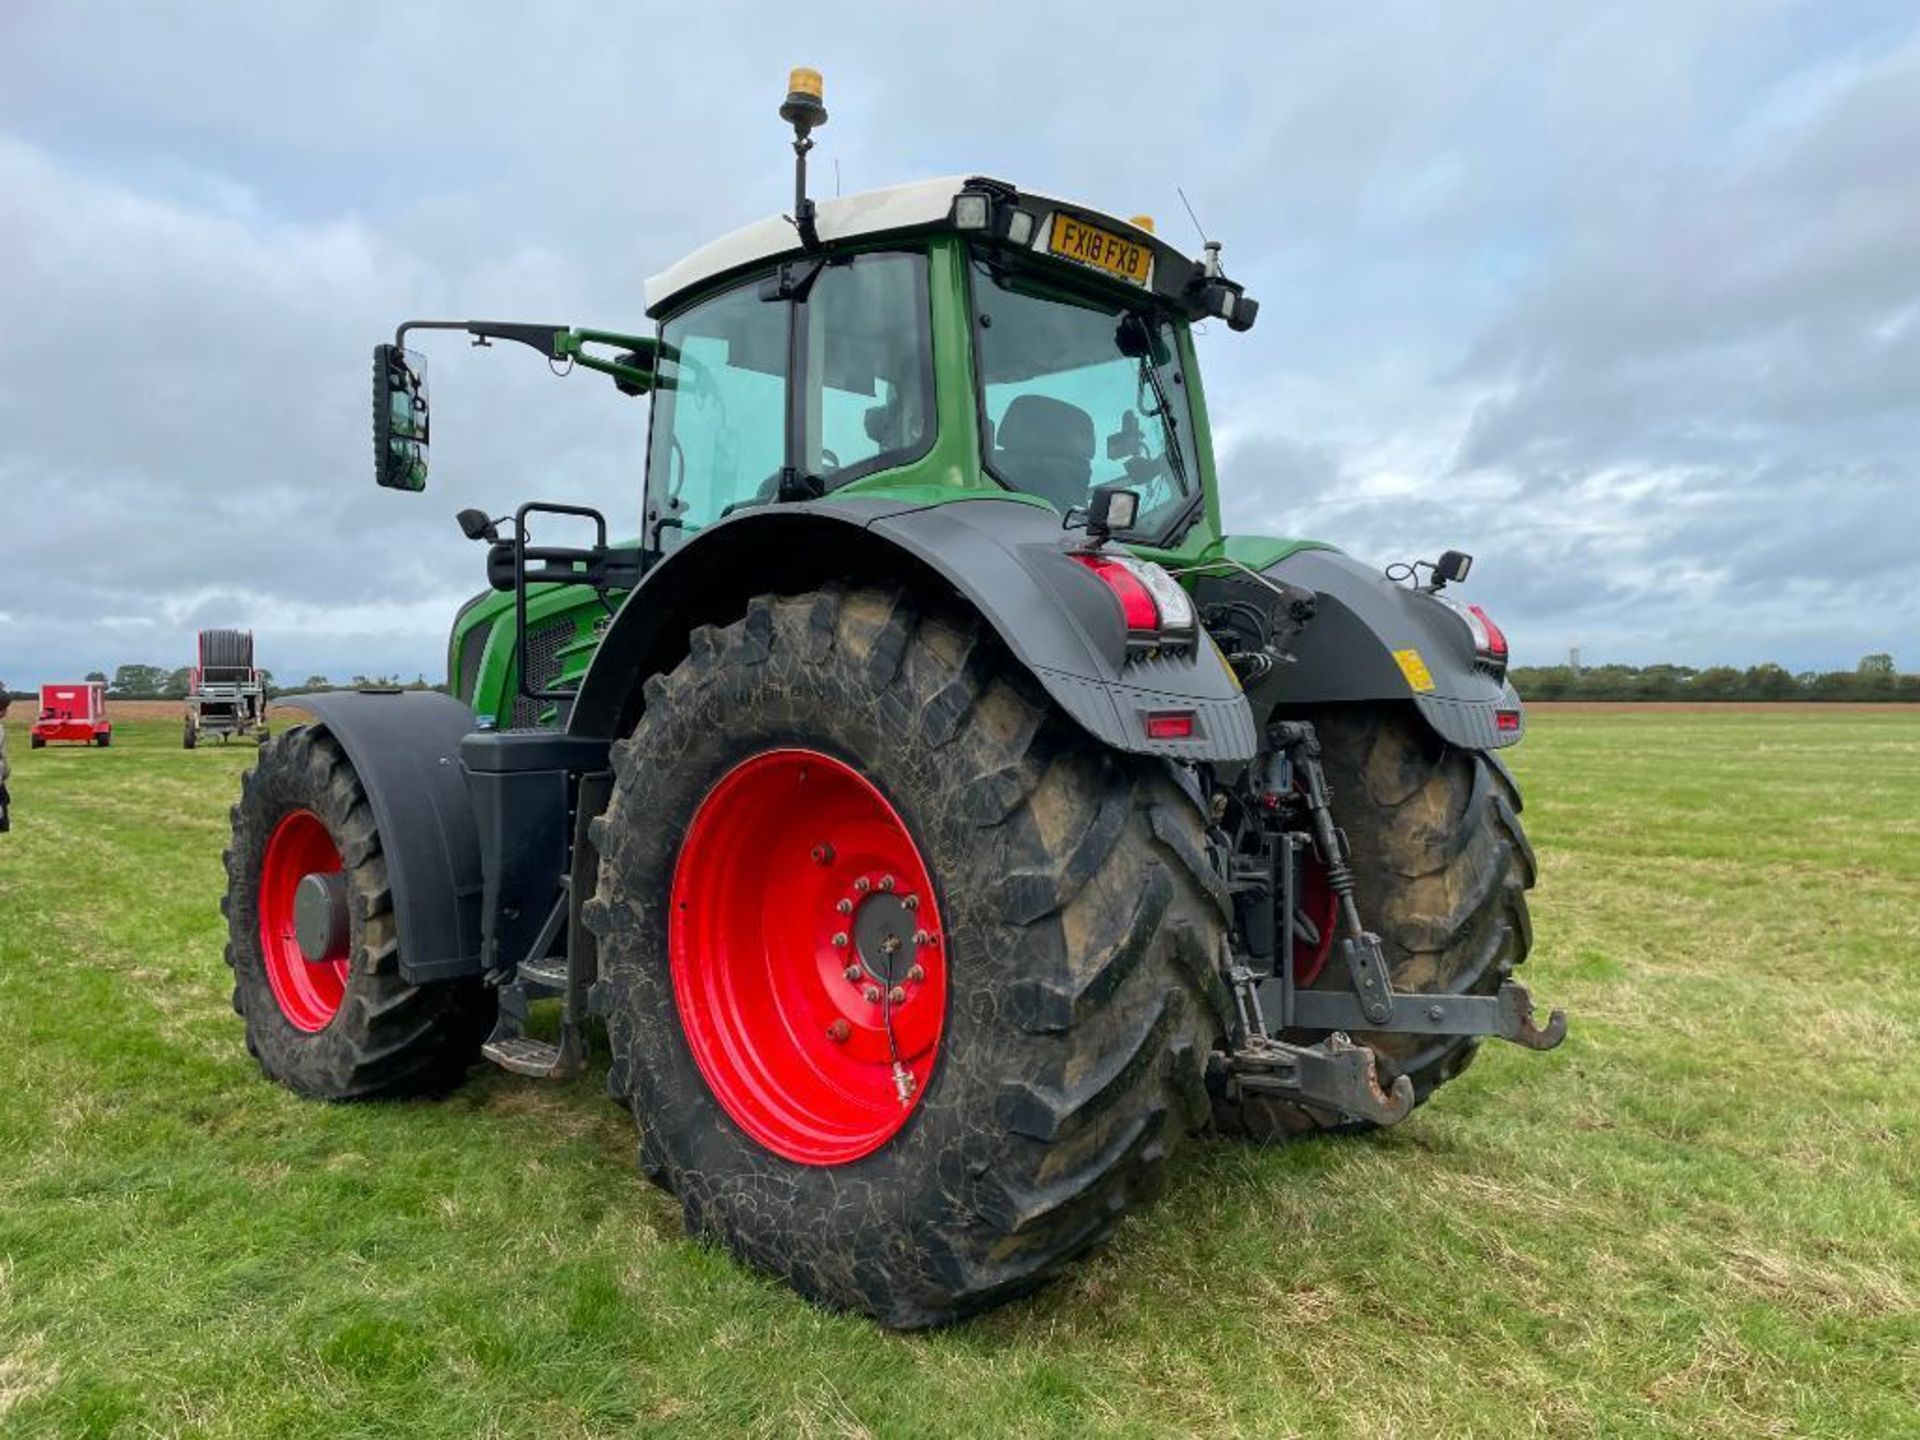 2018 Fendt 930 Vario Profi Plus 65kph 4wd tractor with front and cab suspension, front linkage and h - Image 12 of 20